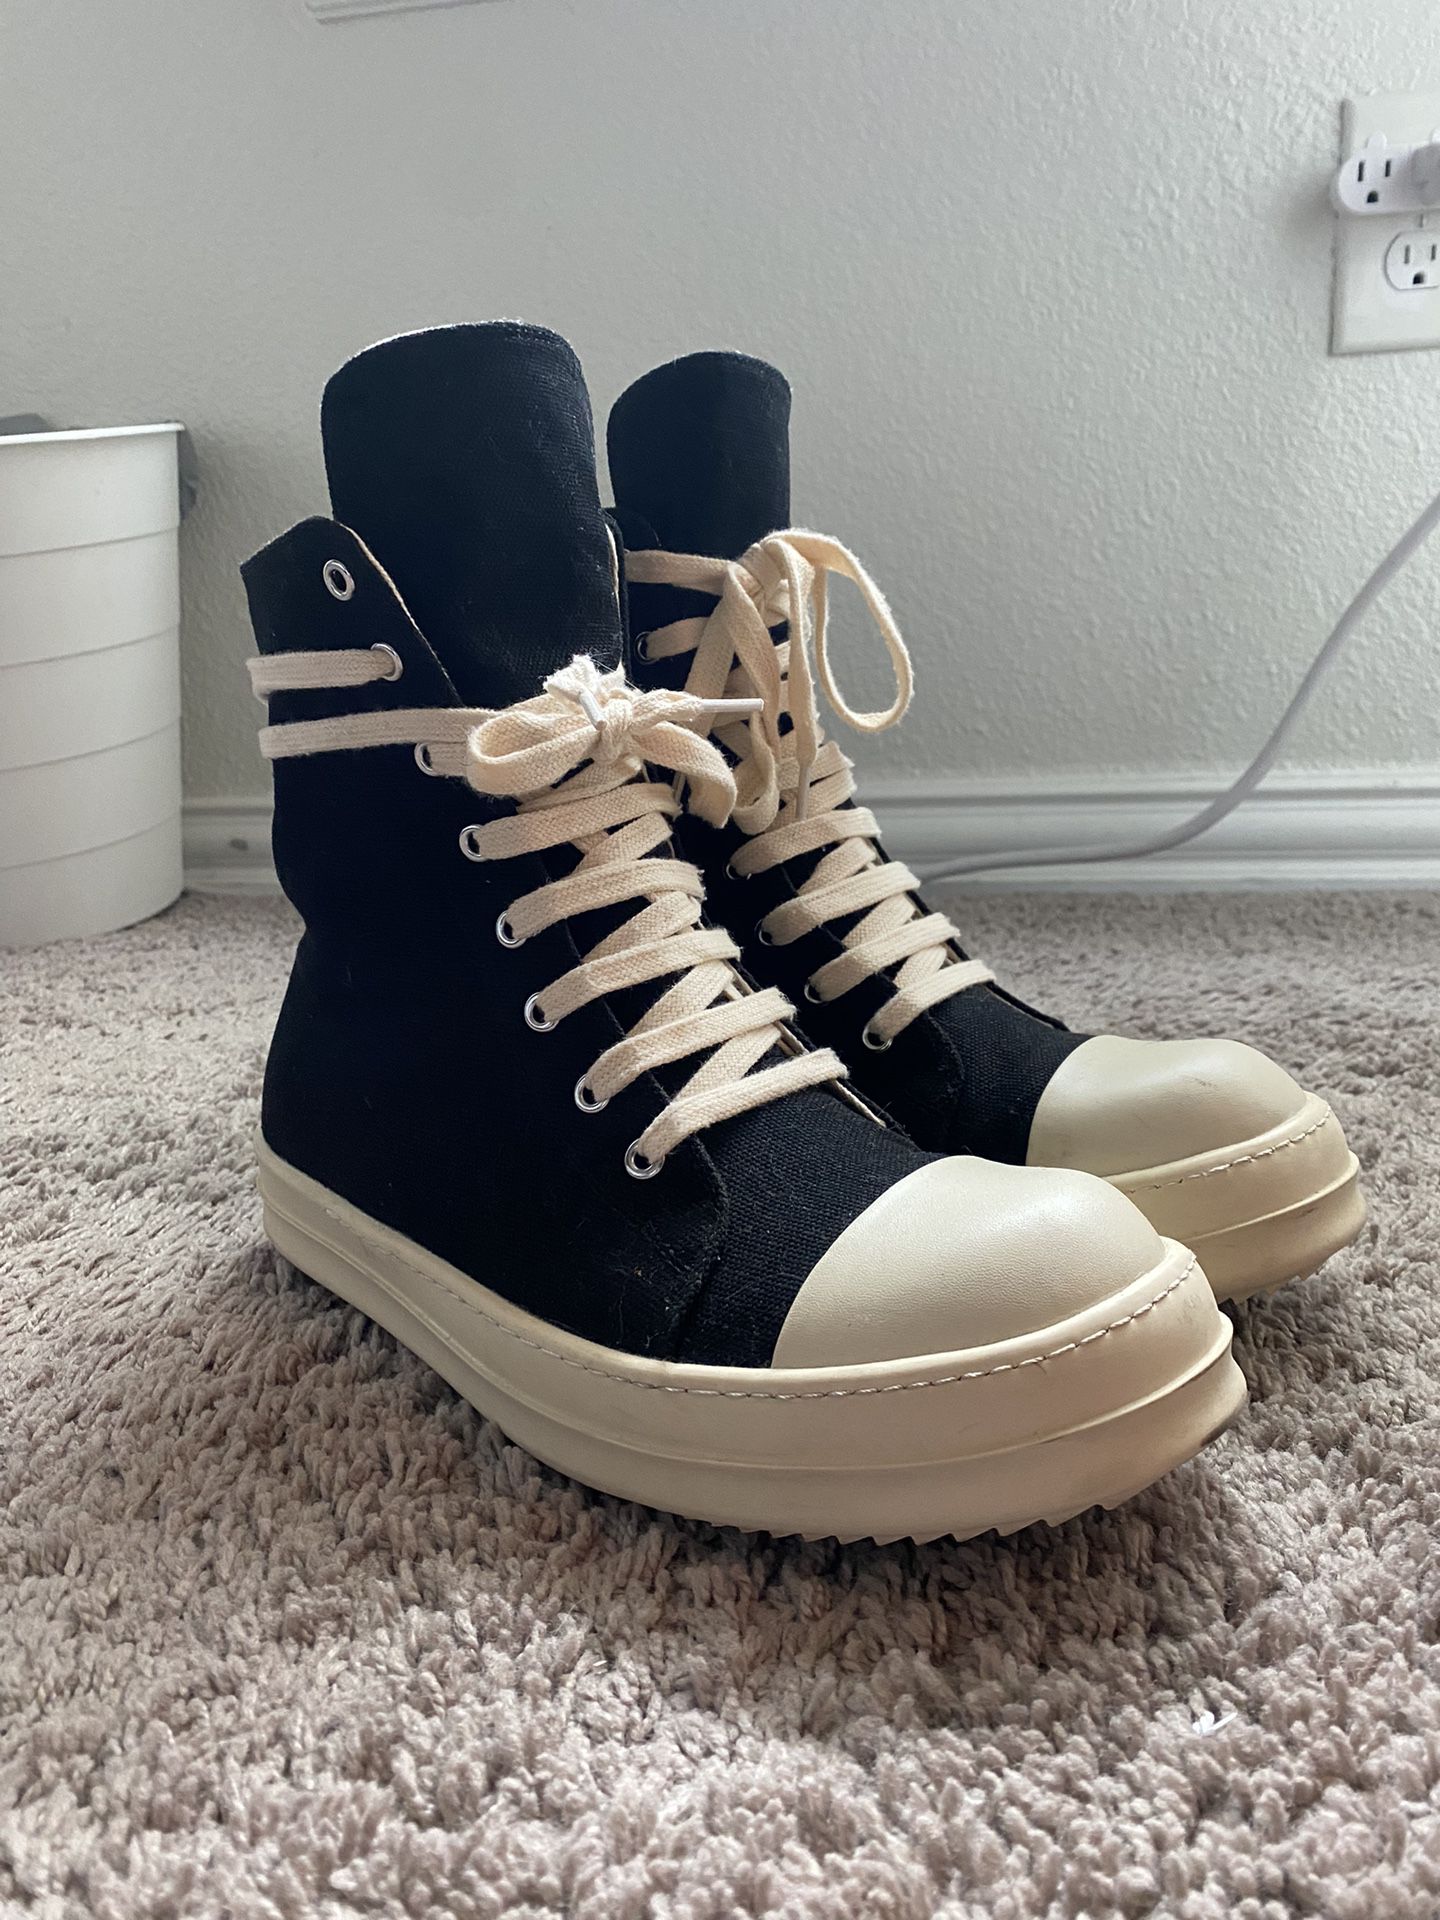 Rick Owens High Tops for Sale in Arlington, TX - OfferUp